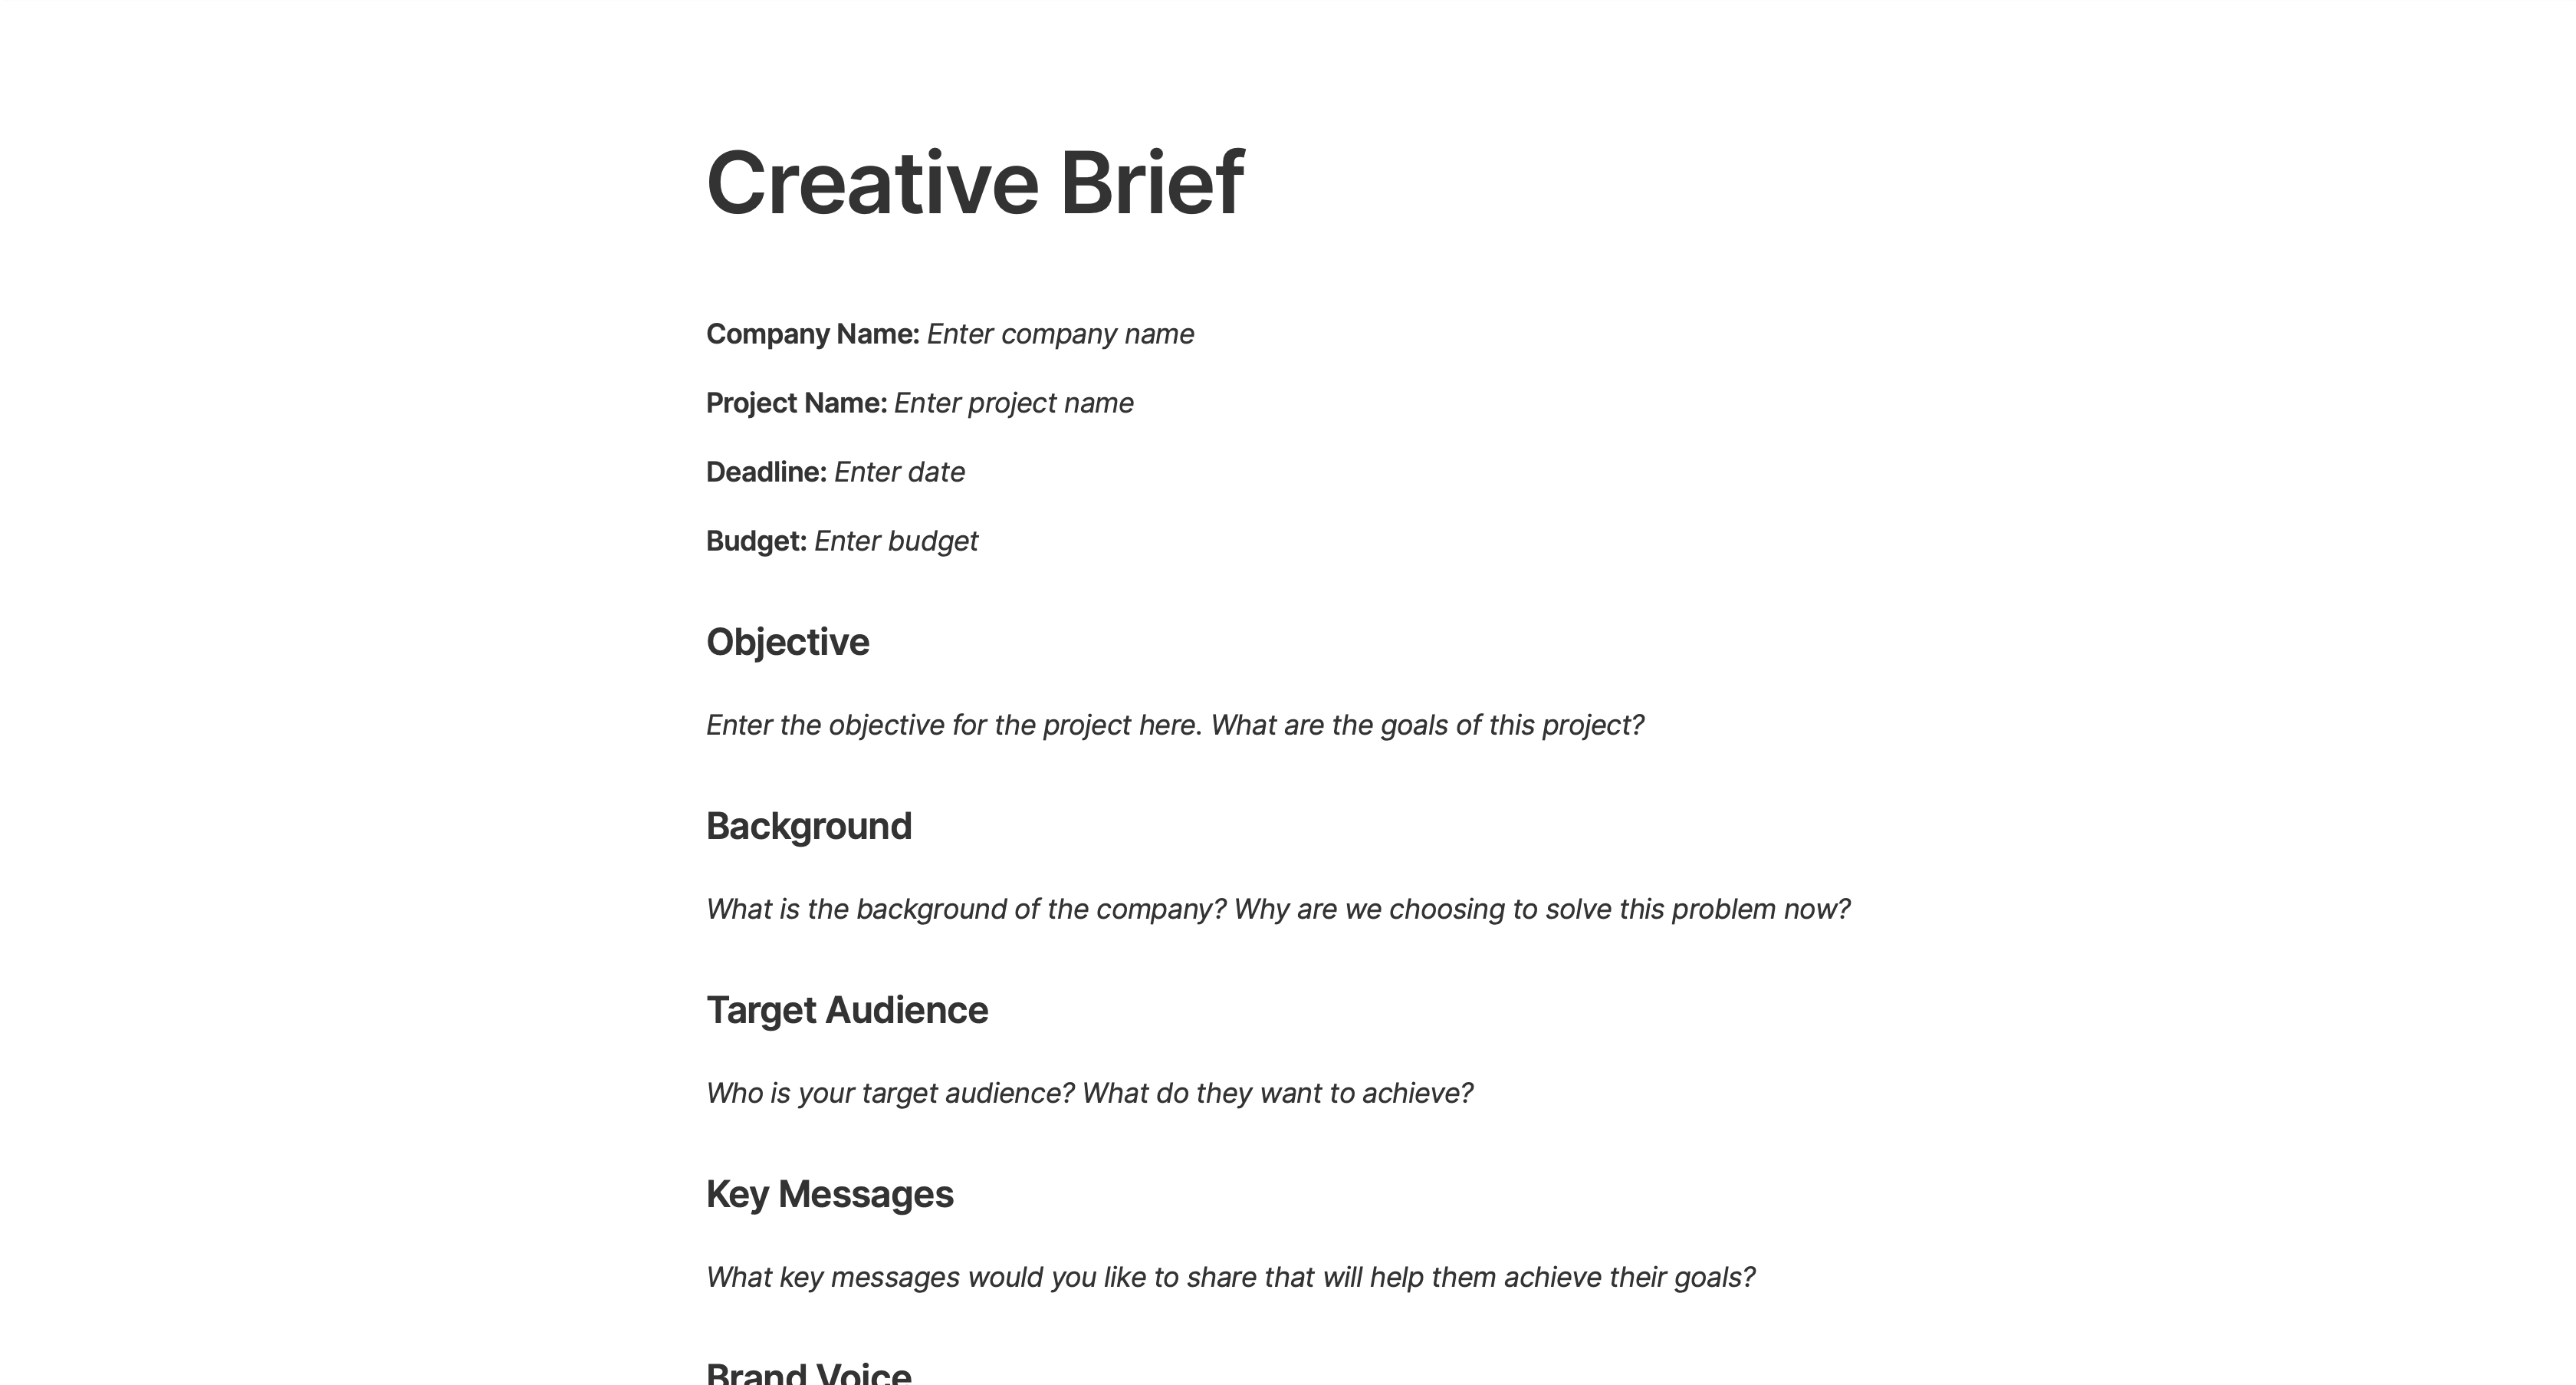 Creative Brief Template Download 14 Creative Brief Examples Assemble